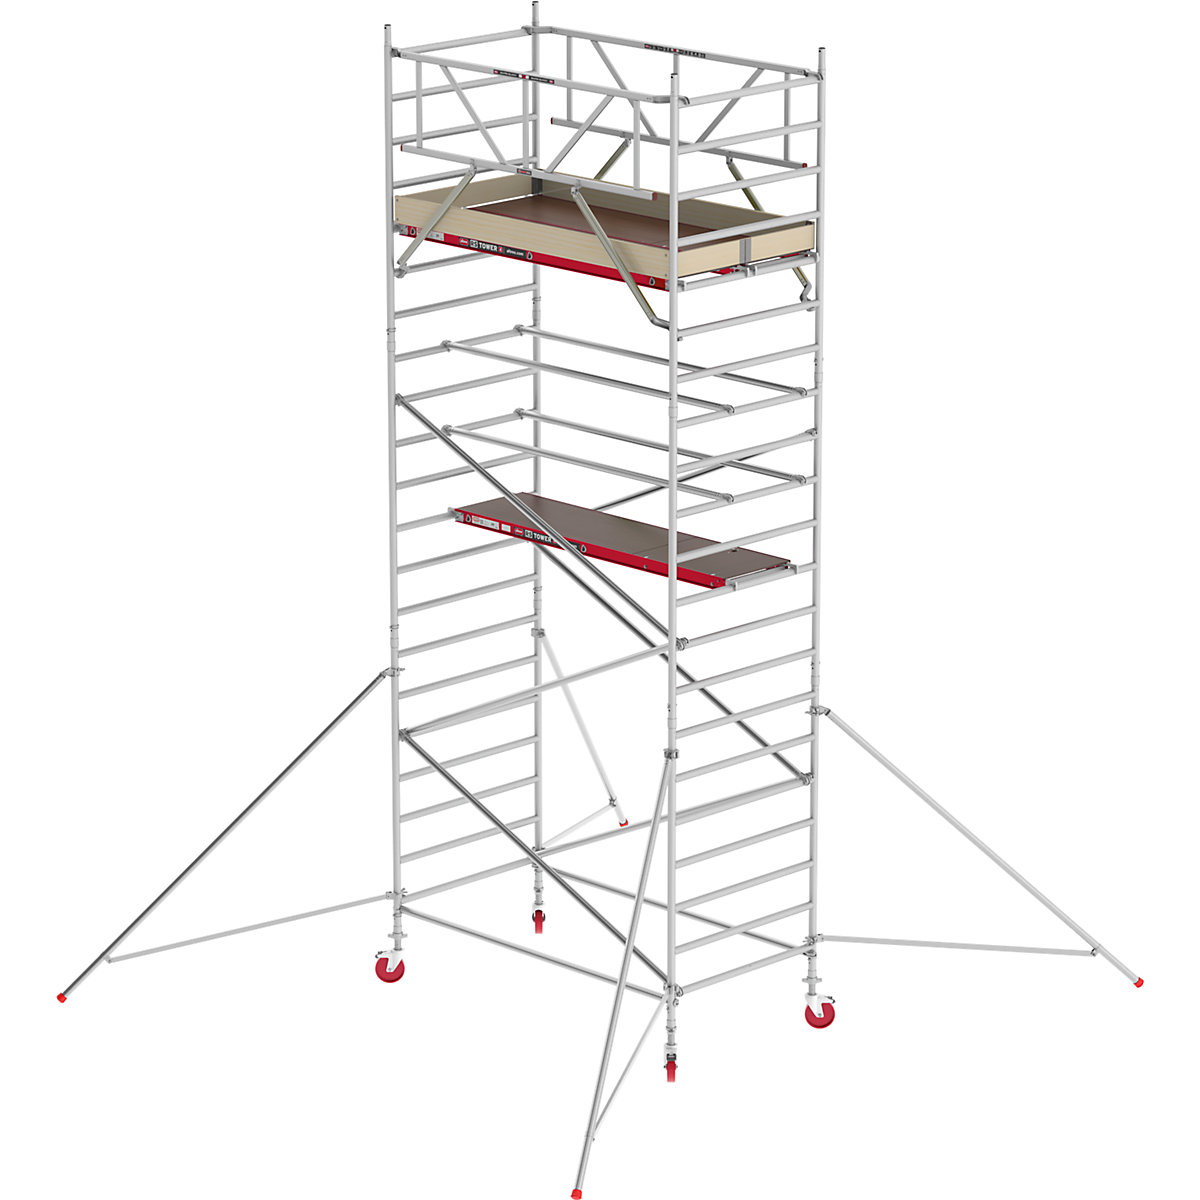 RS TOWER 42 wide mobile access tower – Altrex, wooden platform, length 1.85 m, working height 7.20 m-8